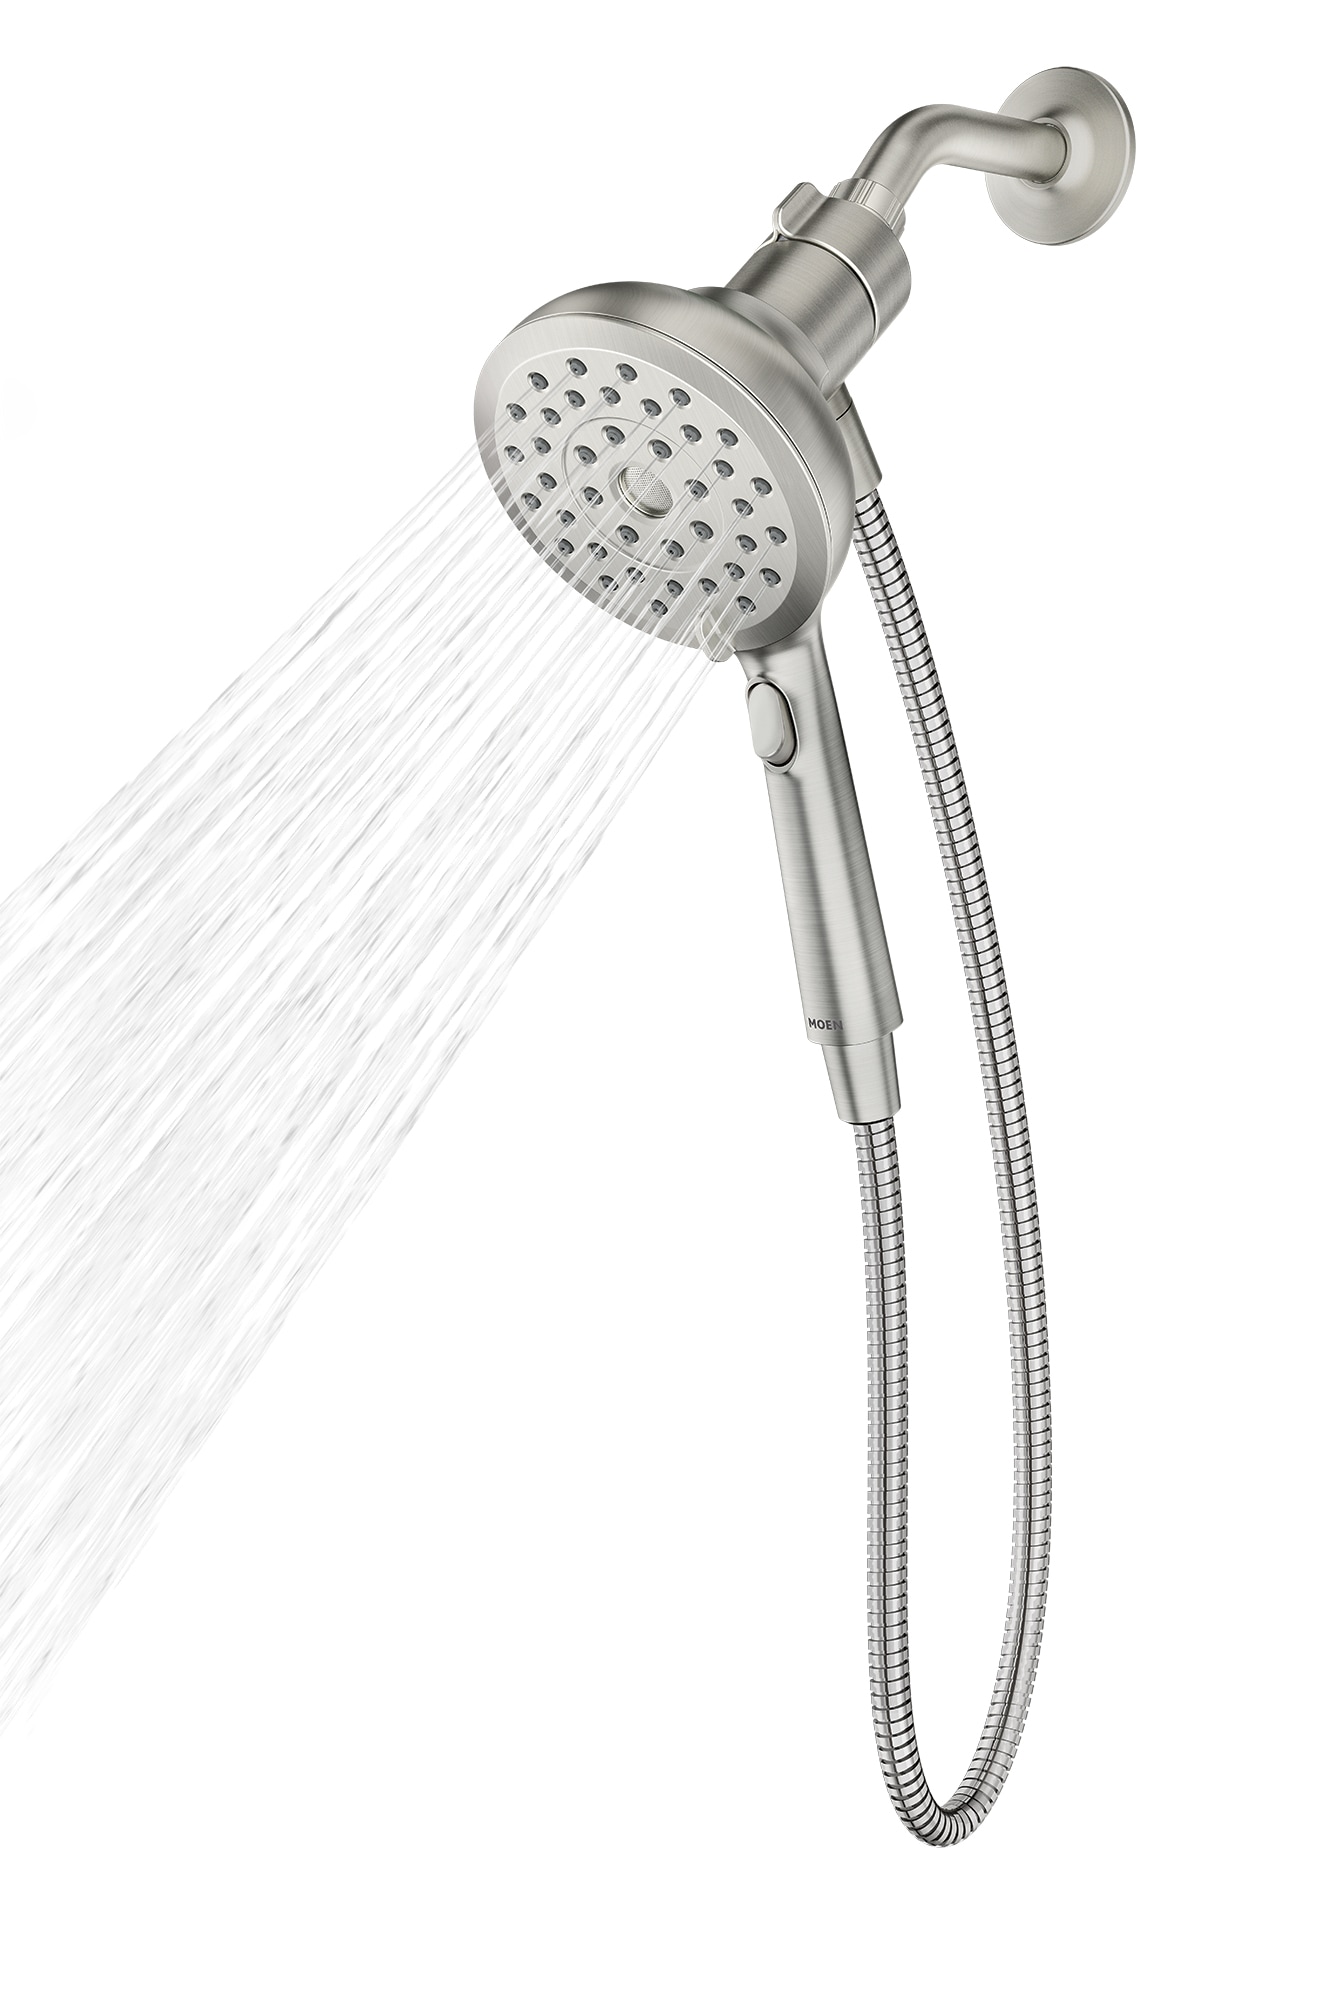 All Metal Hand Held Shower Head with Hose and Holder, Brushed Nickel, Made  w